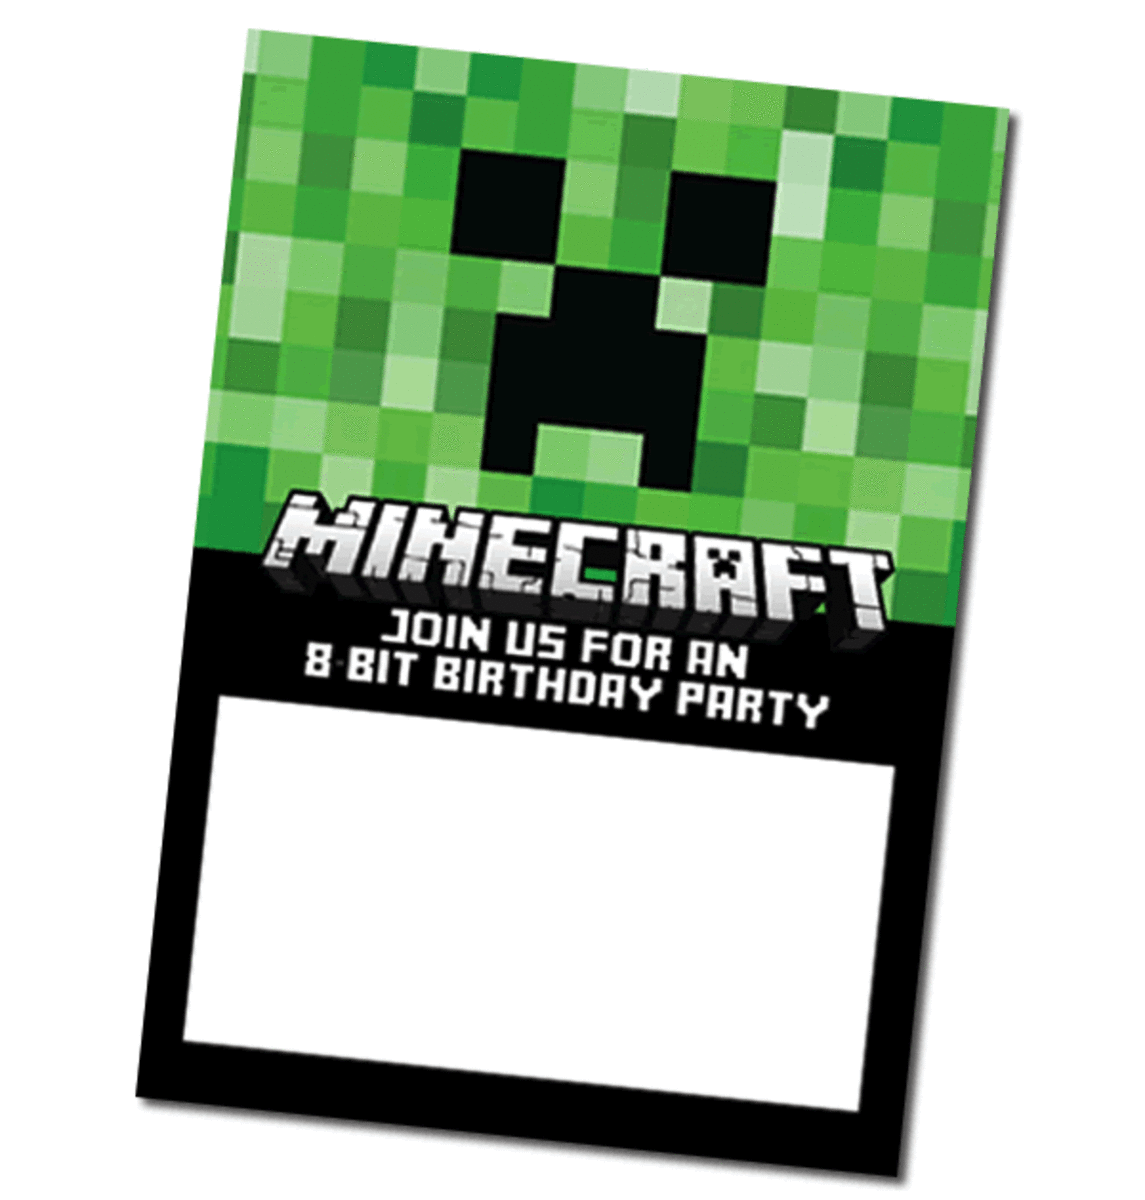 Download this FREE Minecraft Invite courtesy of Digital Mom Blog